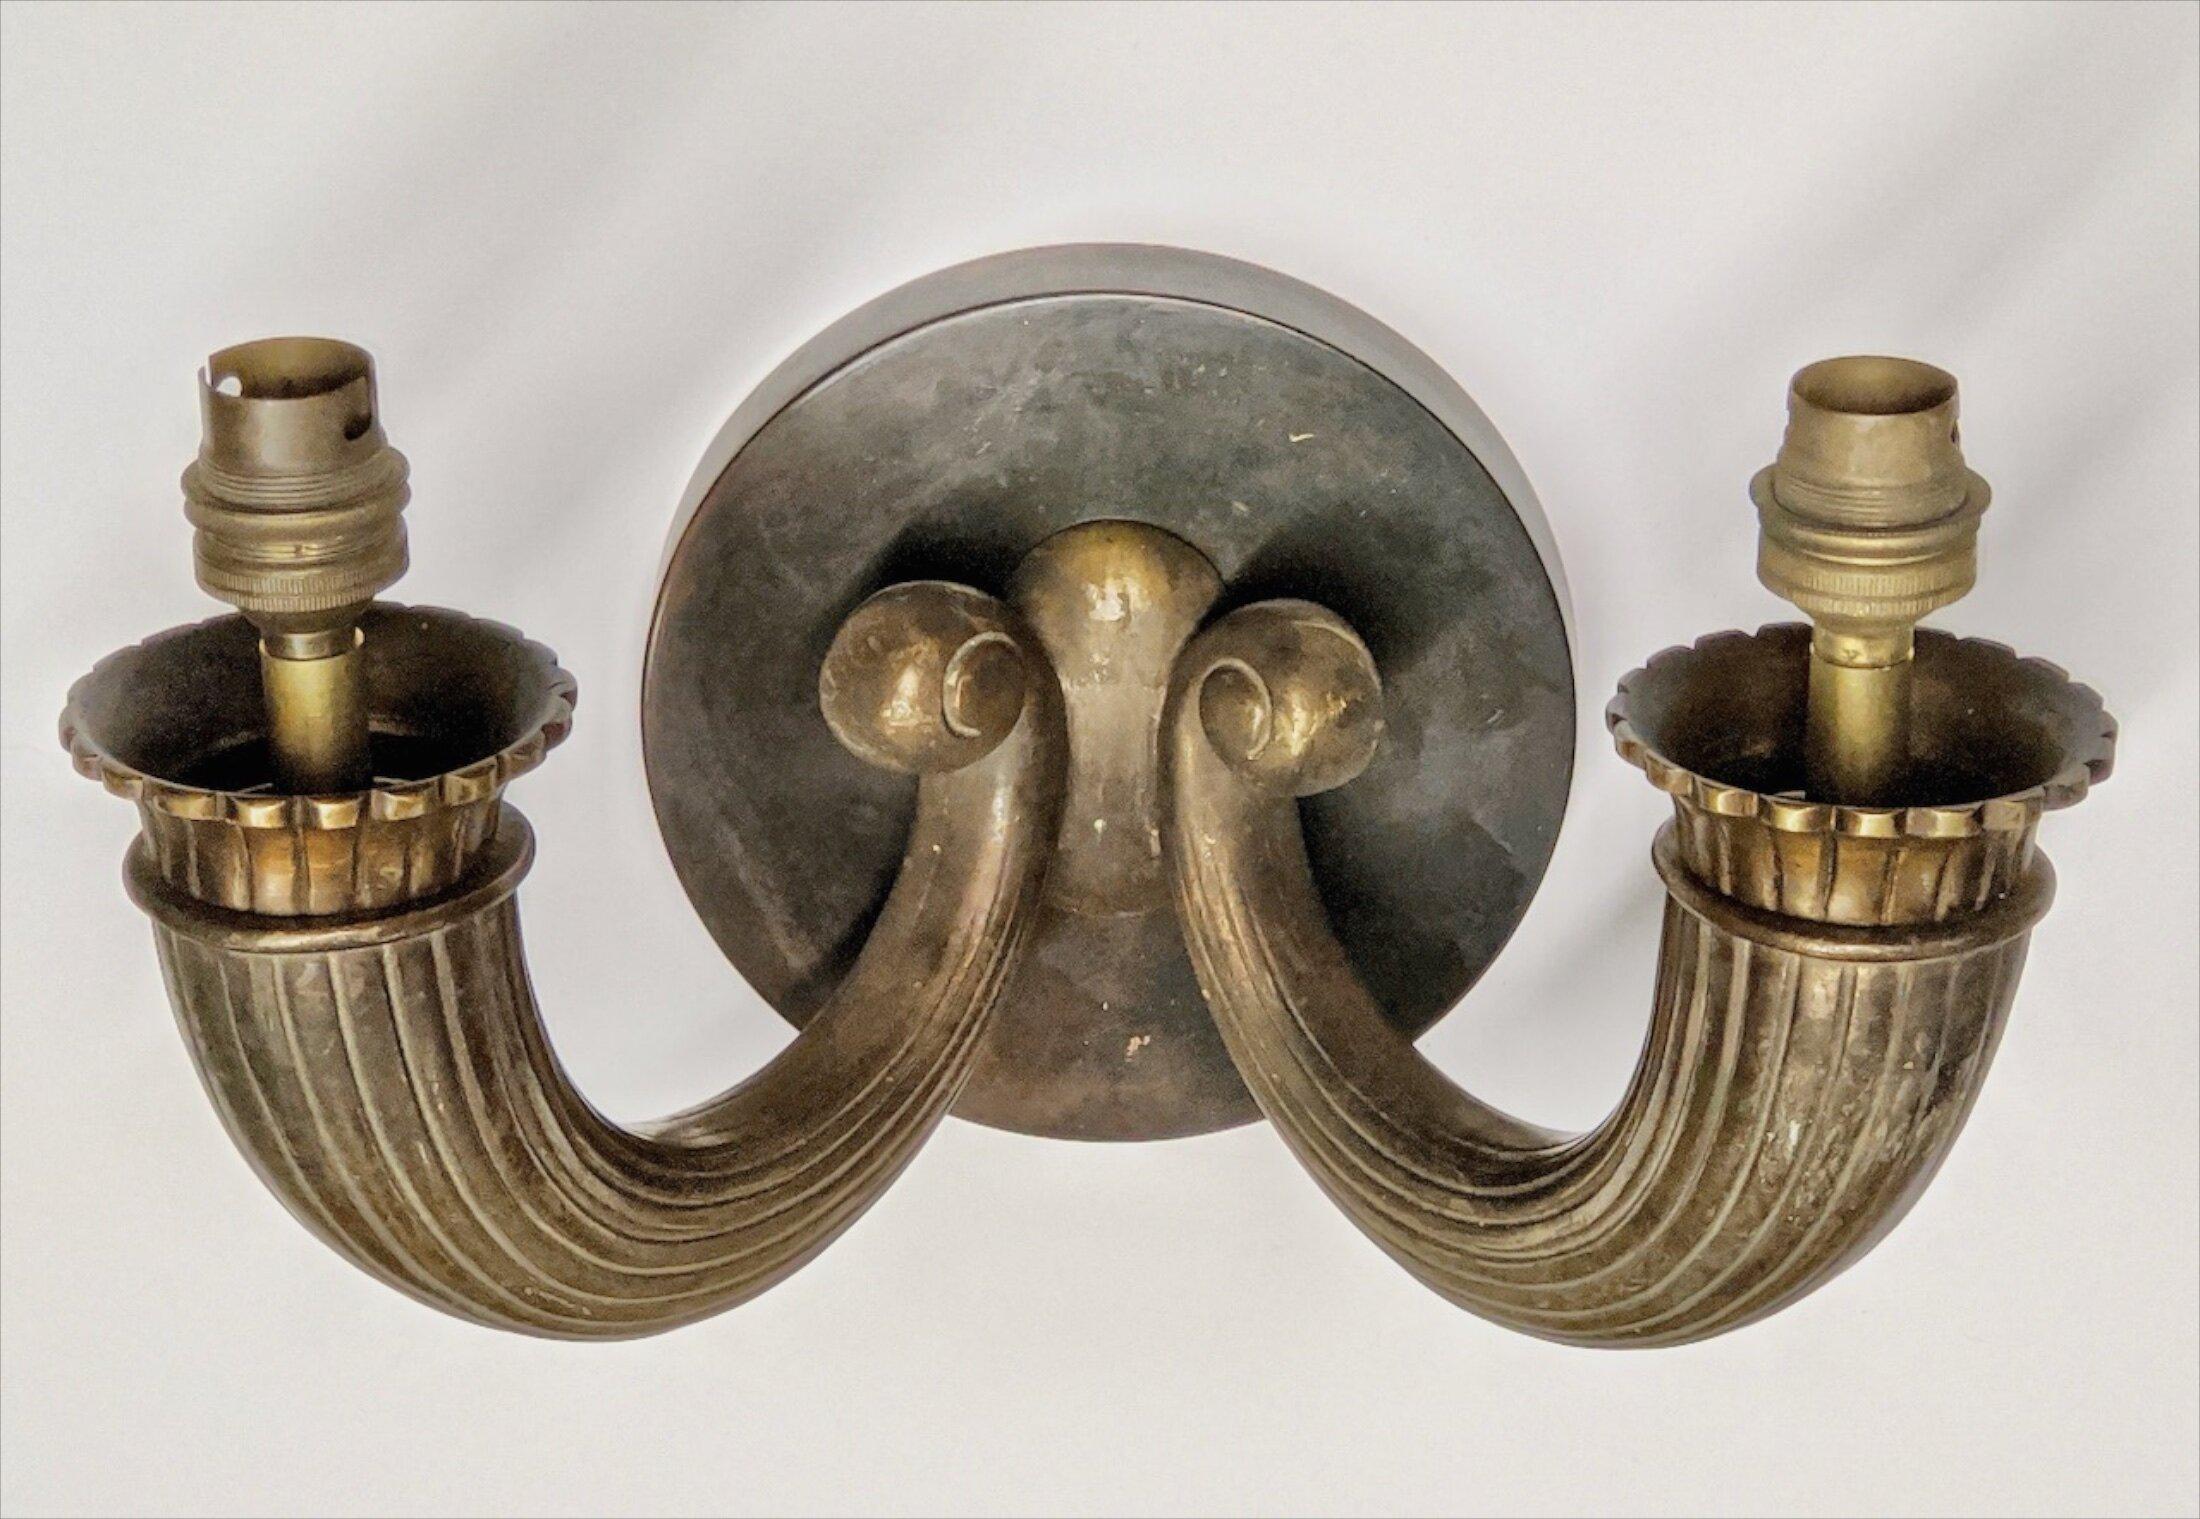 Classic French Art Deco two-branch sconce in sculpted bronze, circa 1925. In the style of Ruhlmann. Measures: 12” wide x 7” deep x 7” high.